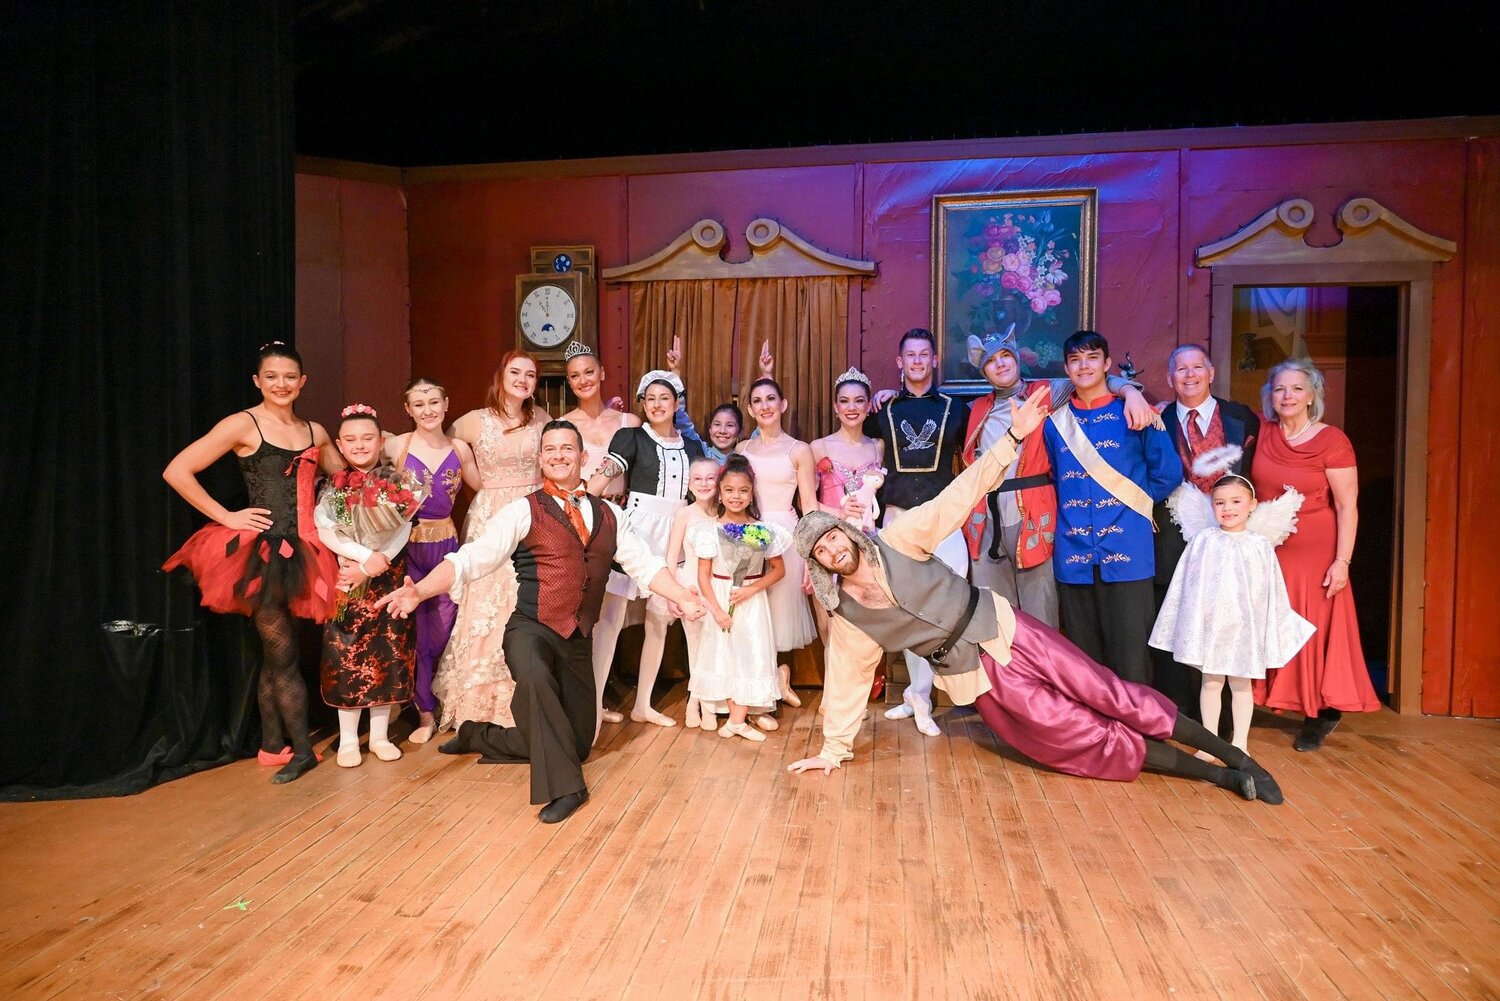 Come and Take It Dance of Gonzales will present their second annual production of “The Nutcracker” at The Crystal Theatre this Saturday, Jan. 6, and Sunday, Jan. 7. The show will feature local dancers as well as guest professionals.